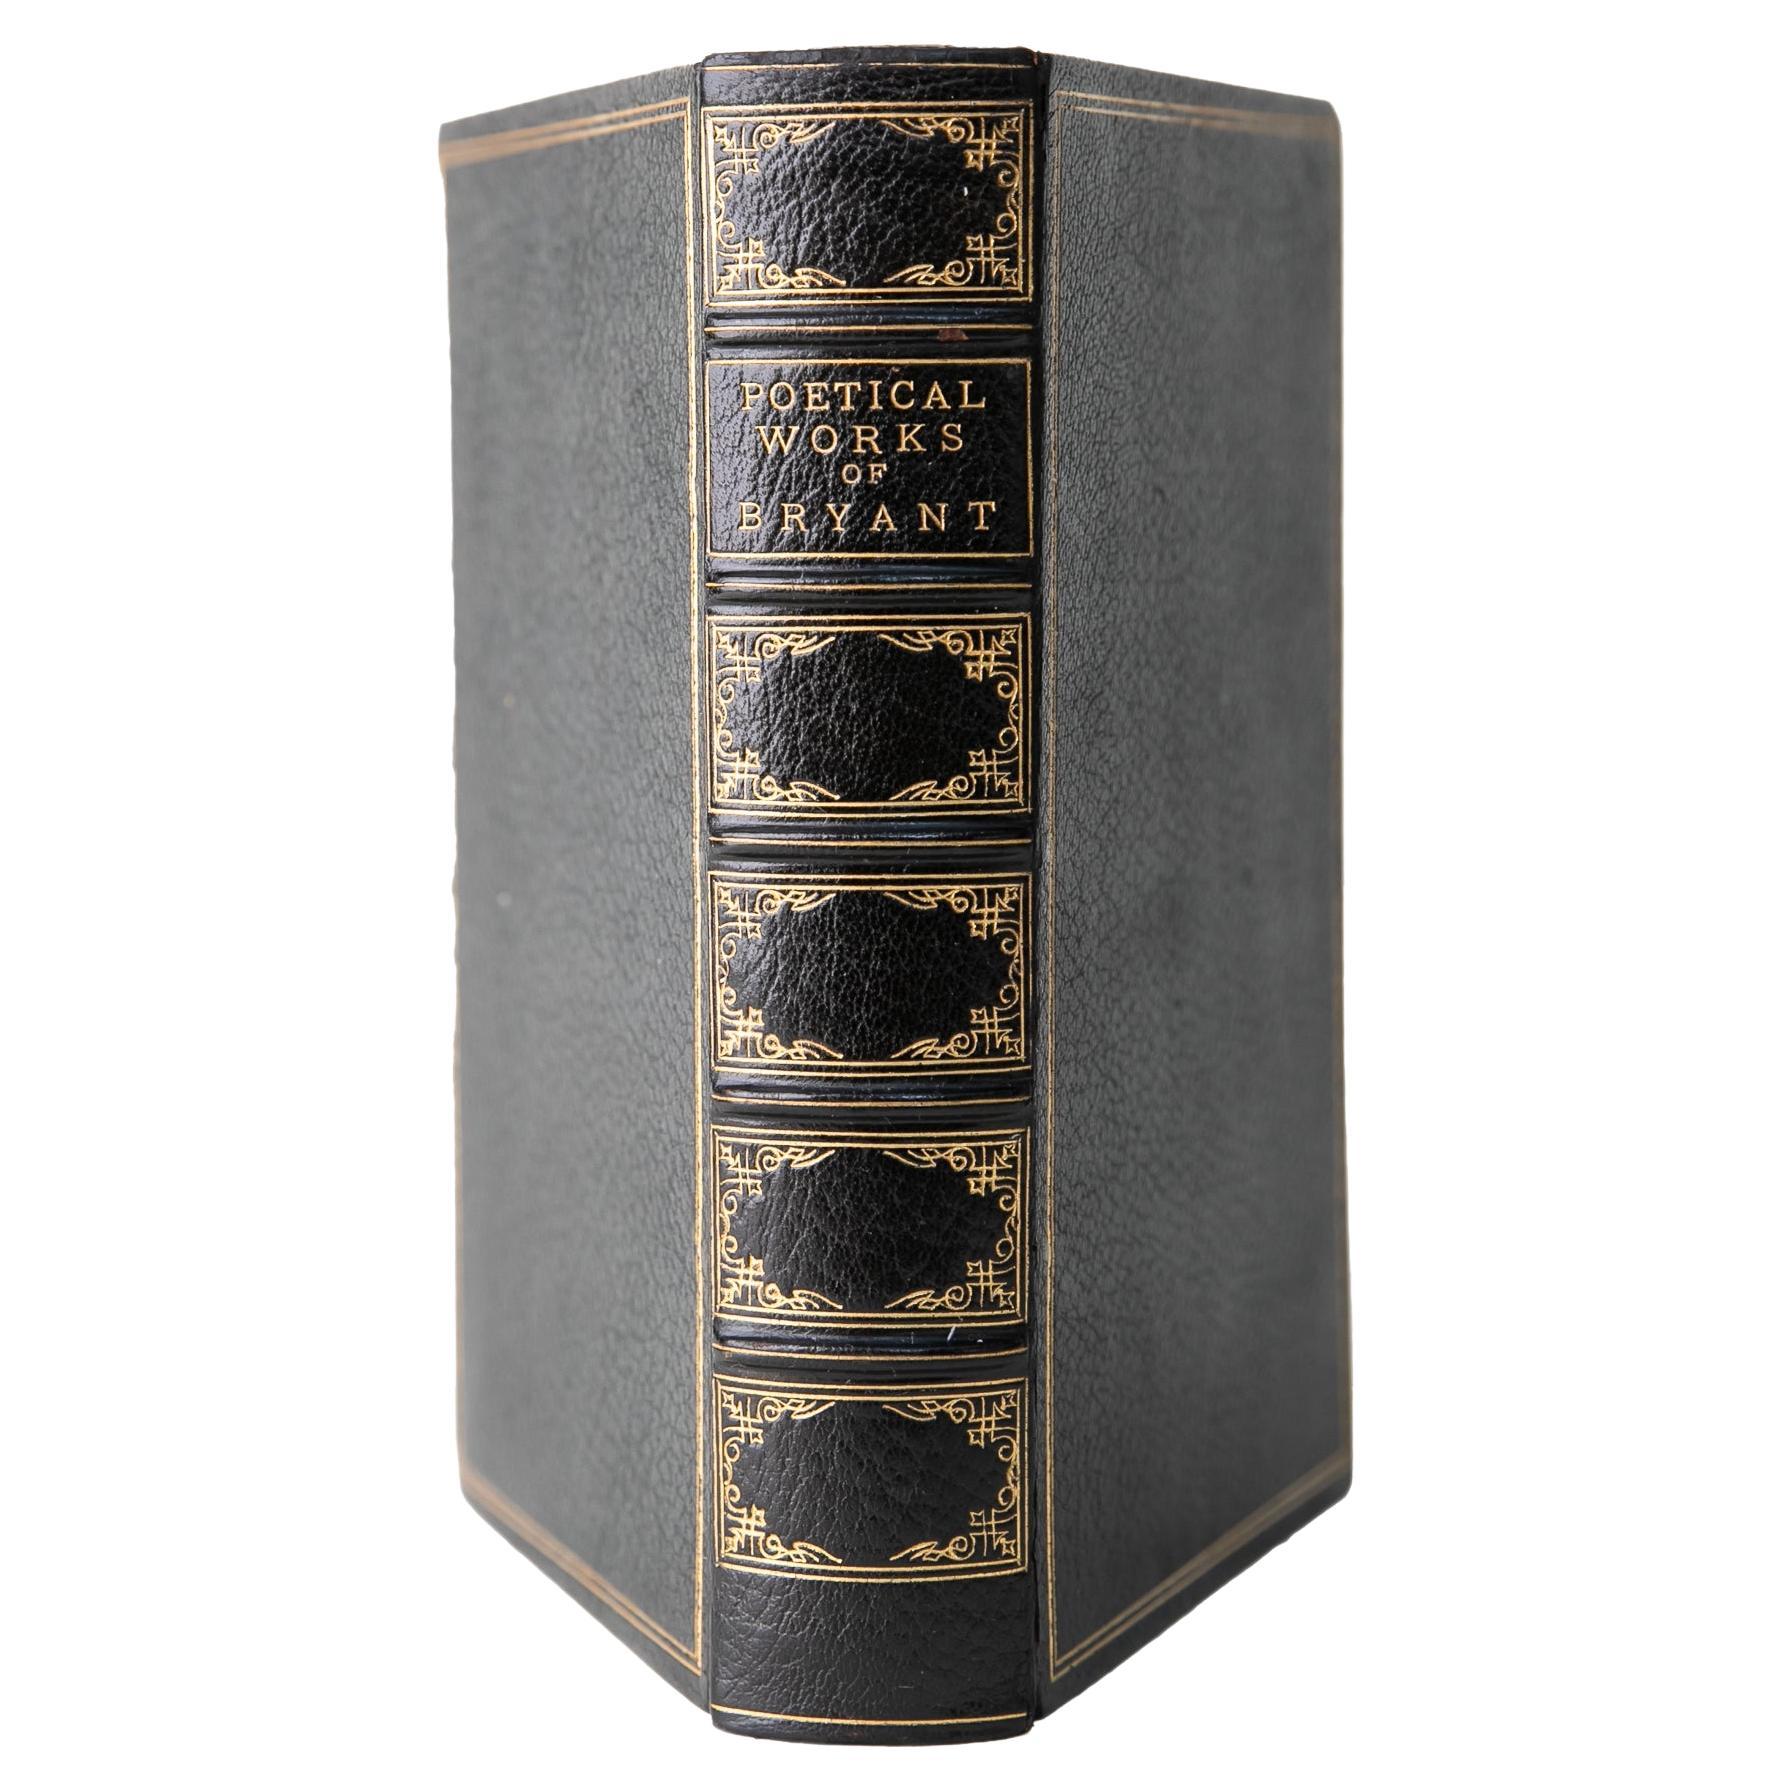 1 Volume. William Cullen Bryant, The Poetical Works